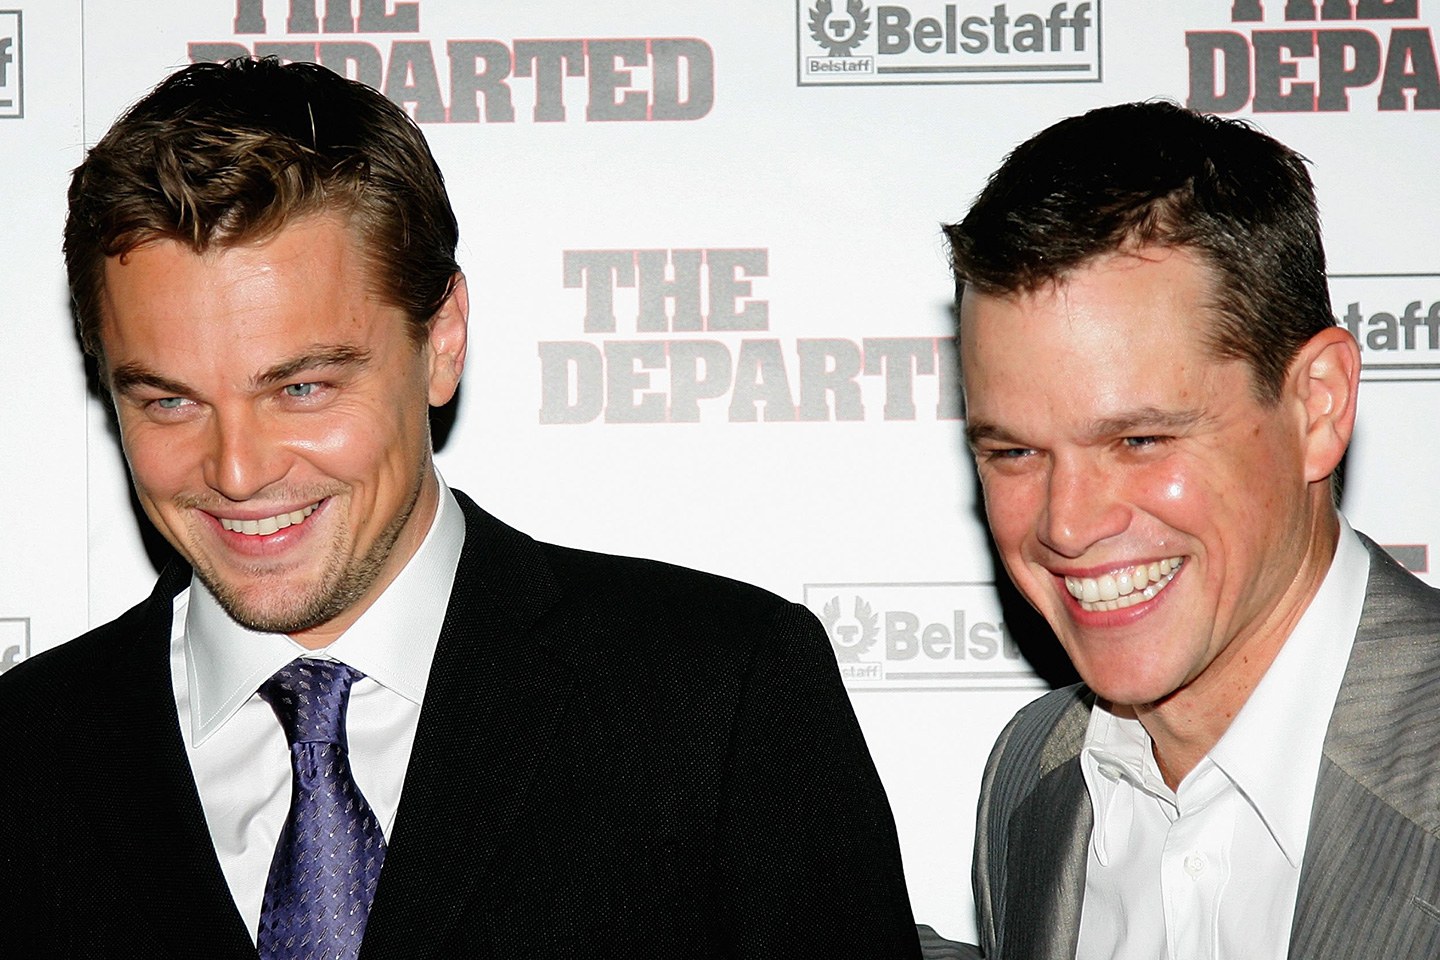 Would The Top Matt Damon Movies Be Better As DiCaprio Movies?1440 x 960